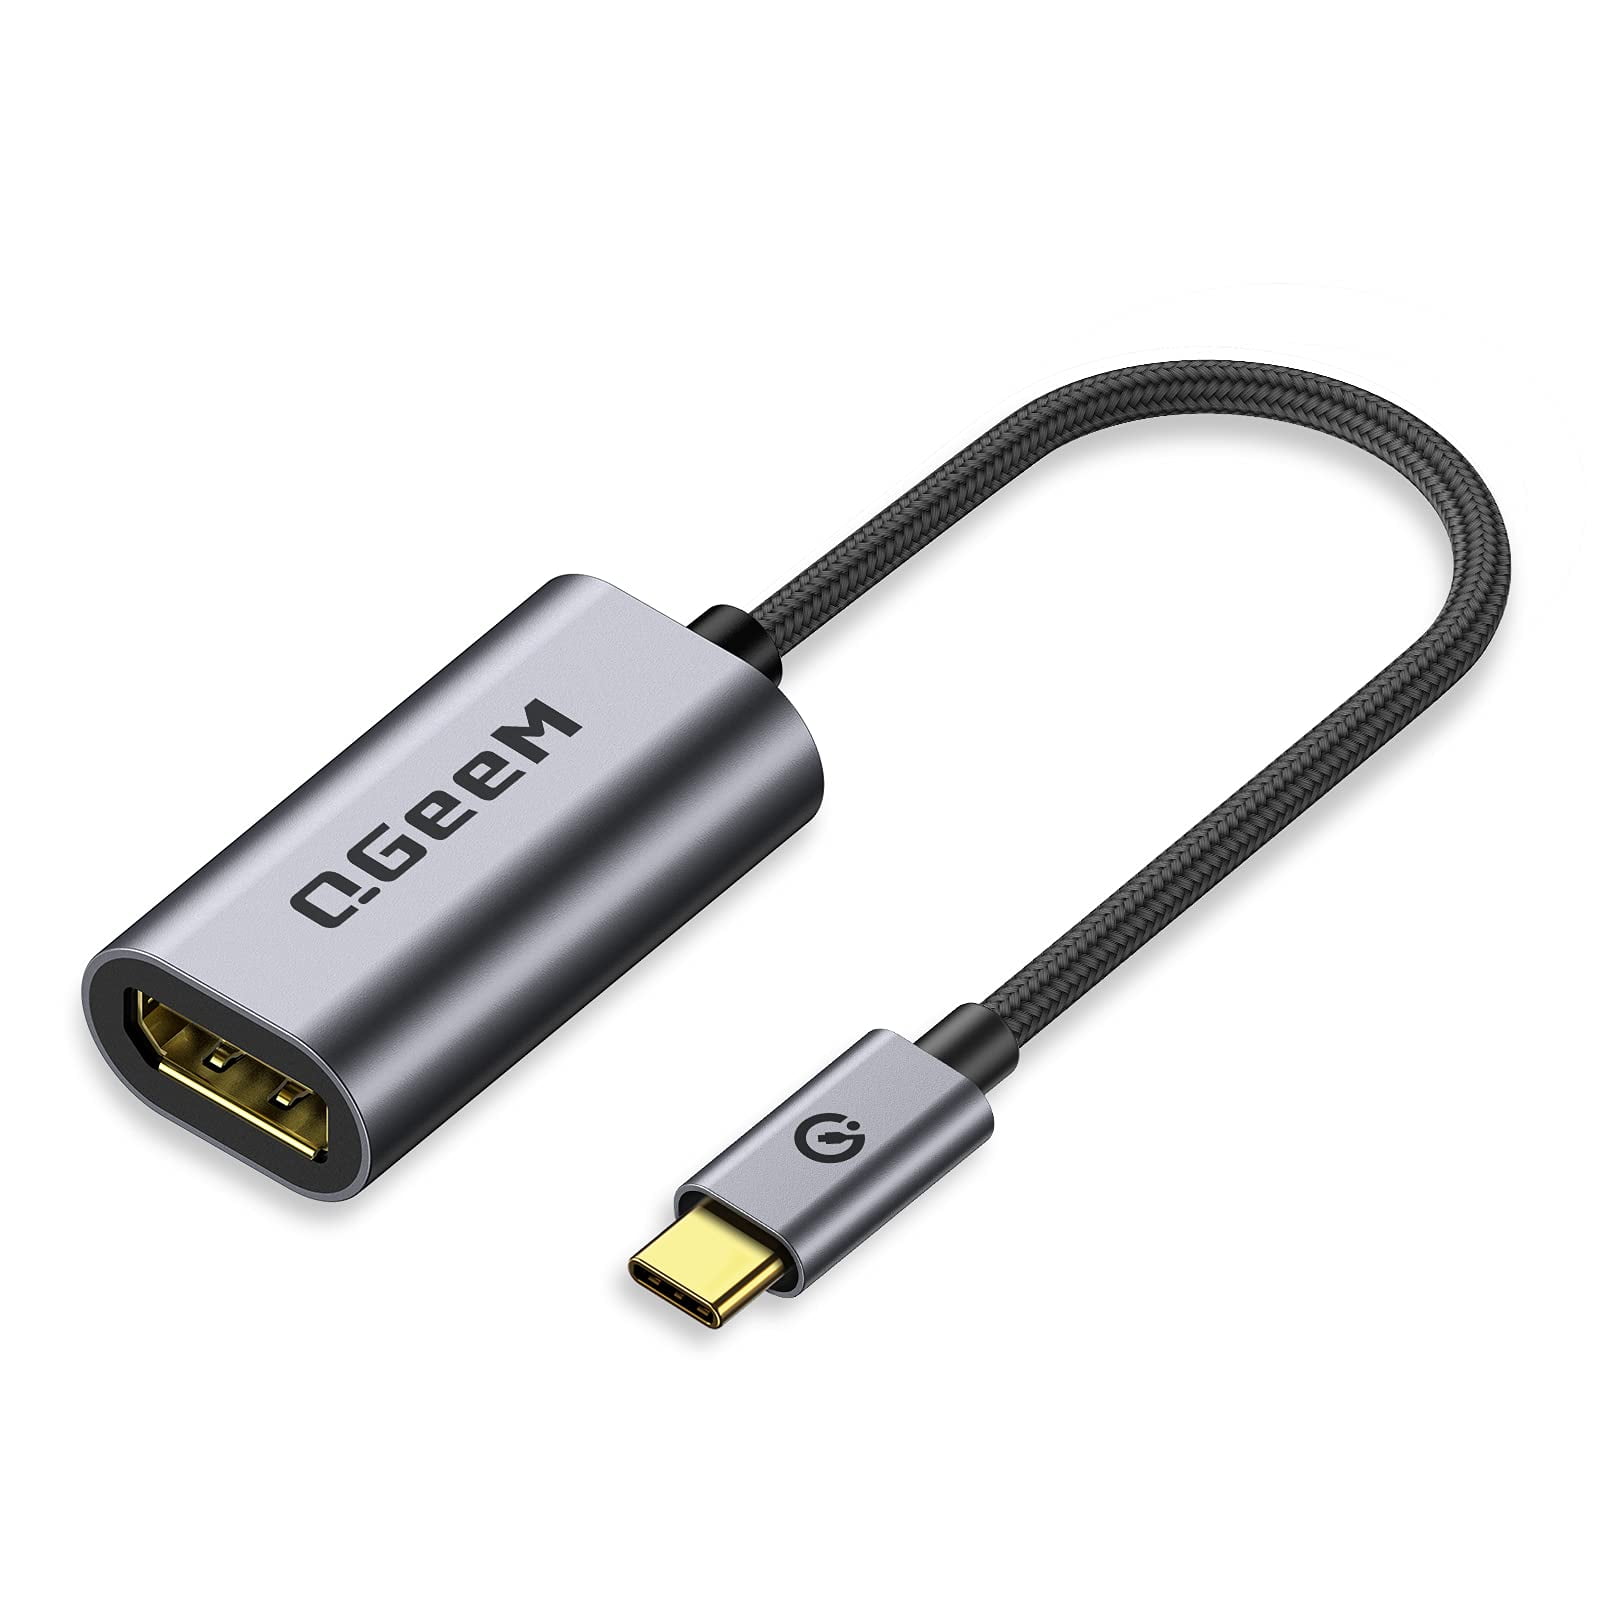 Surface Book 2 QGeeM Thunderbolt 3 to HDMI Cable Compatible for MacBook Pro 2019/2018/2017 Dell XPS 13/15 4K@60Hz Samsung Galaxy S10/S9 and More MacBook Air/iPad Pro 2018 USB C to HDMI Adapter